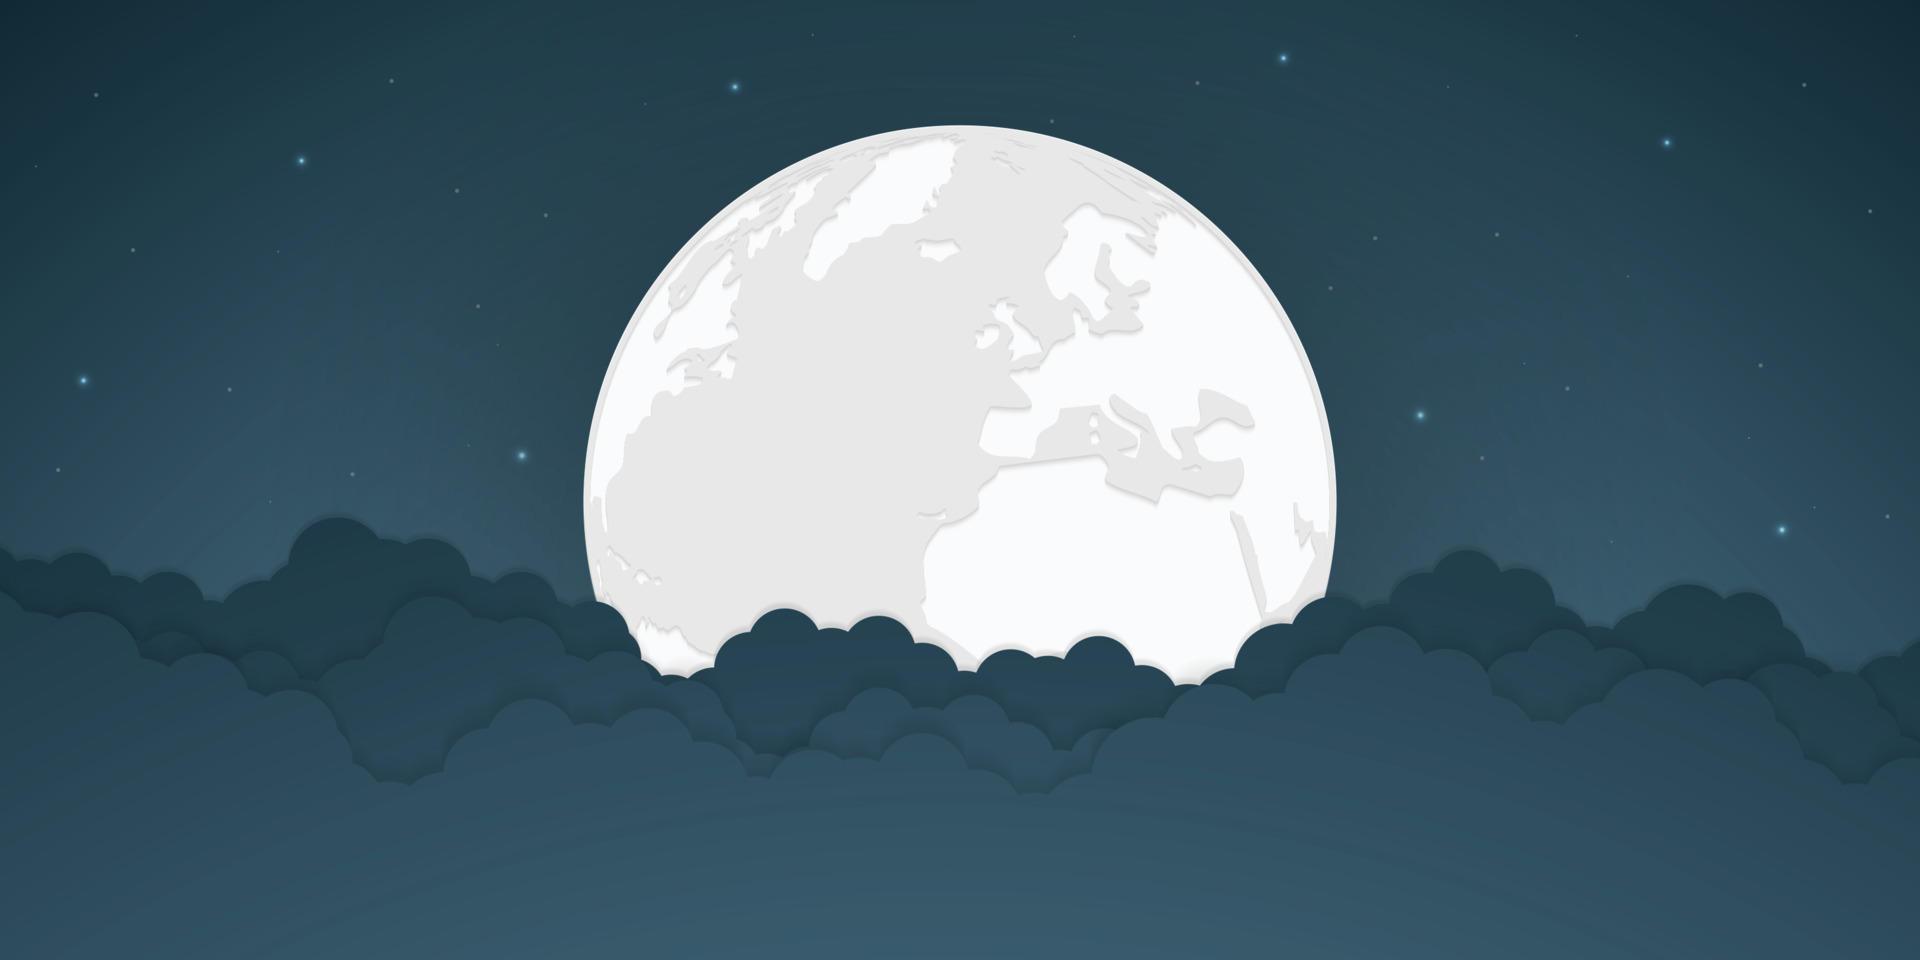 Full moon and bright stars with cloud, vector illustration.